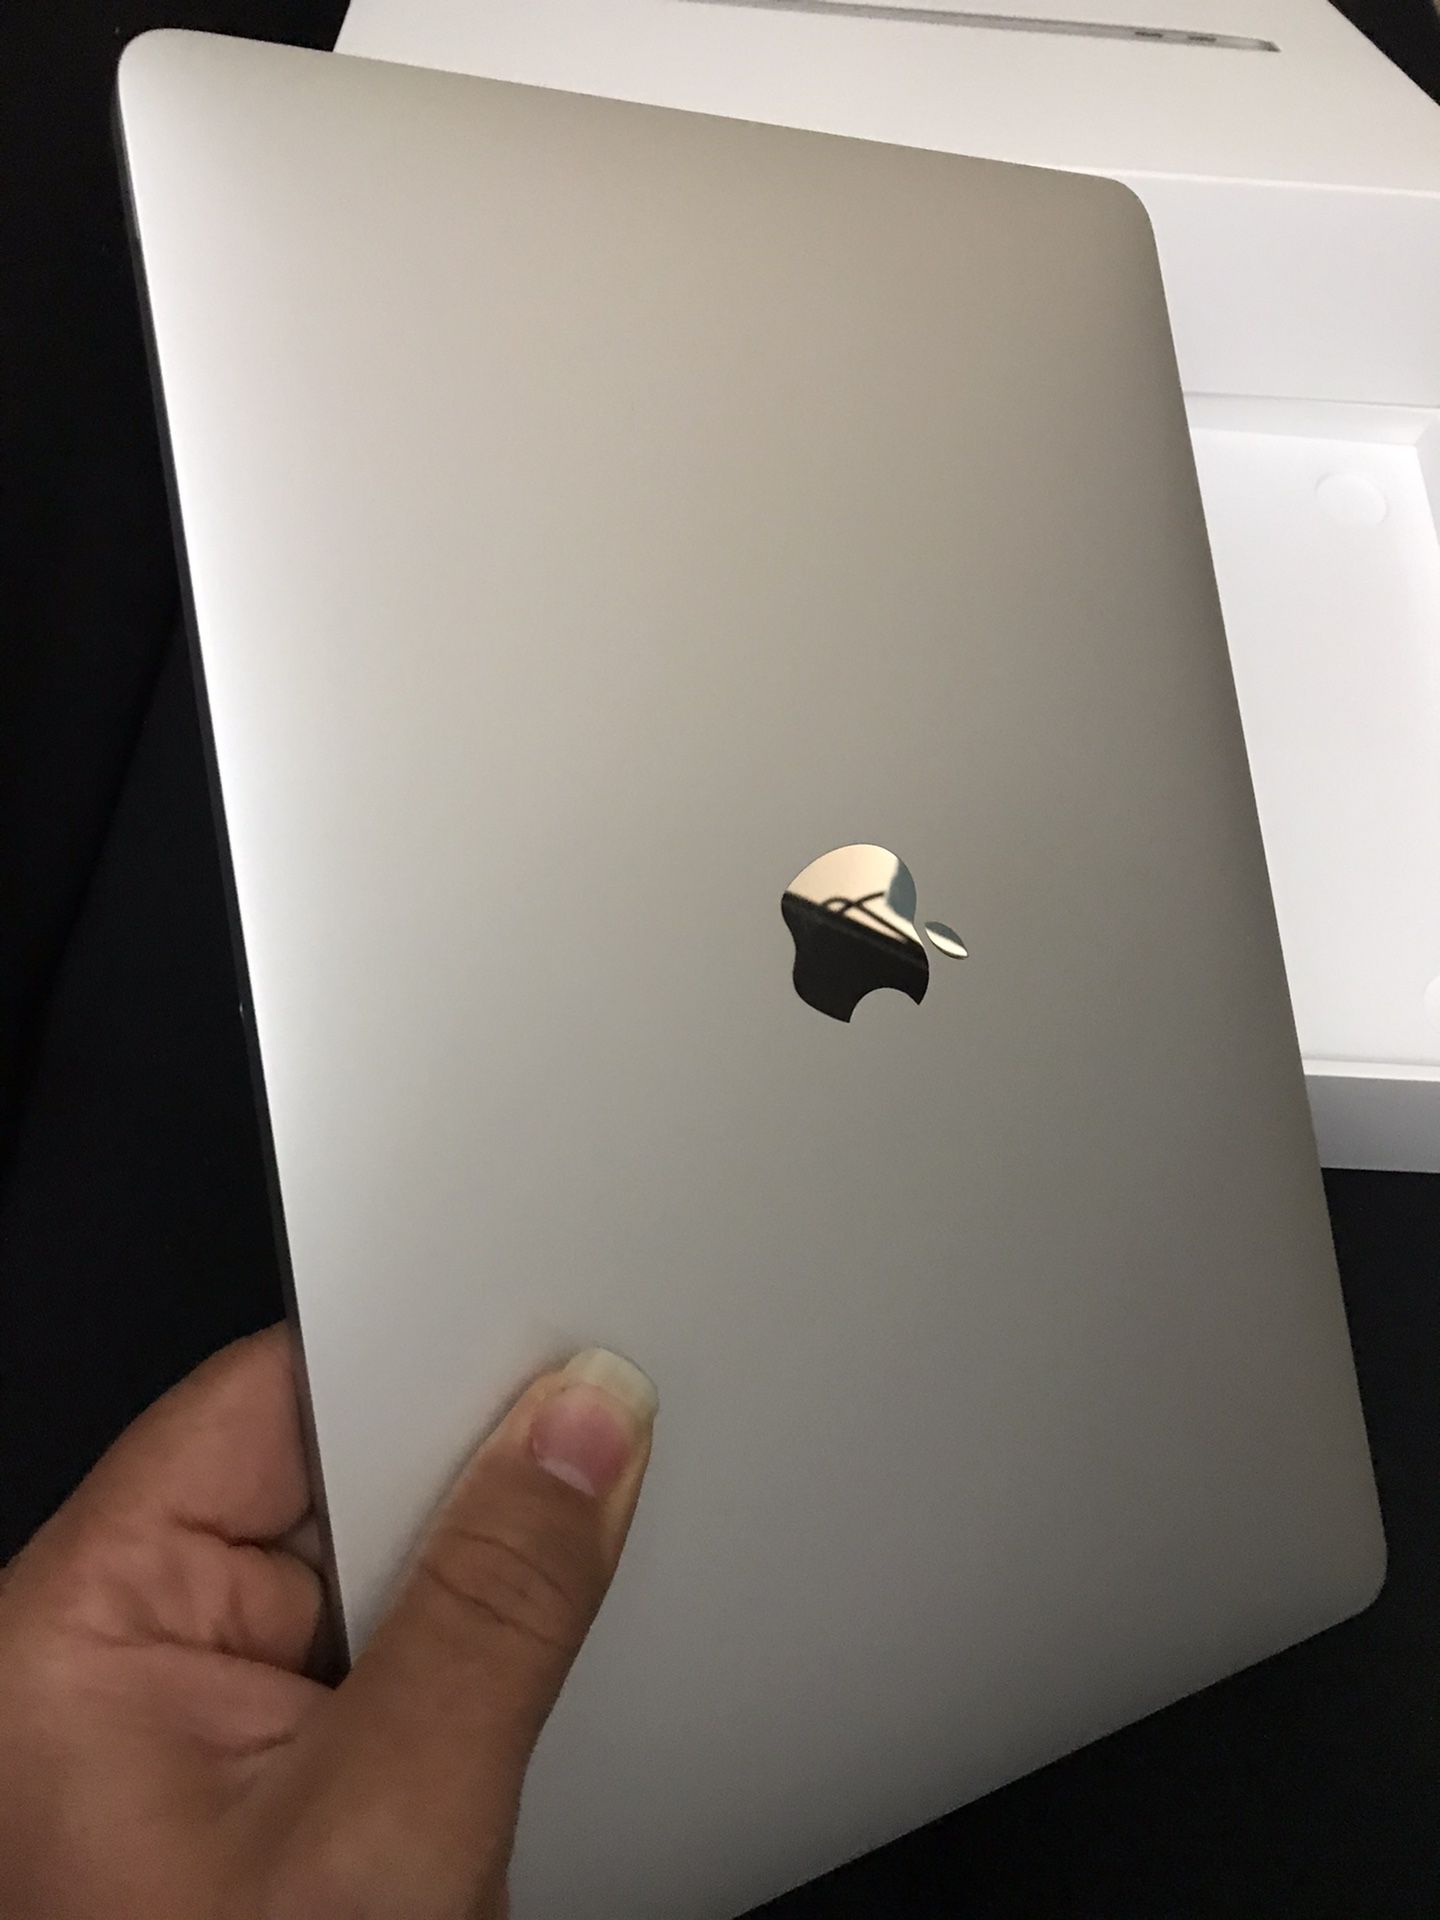 LIKE BRAND NEW 2018 Macbook Air 13" Retina | FINGER PRINT | Touch ID | Dual Core Intel i5 (1.6Ghz) - 8GB - 128GB SSD | A1932 | Battery Cycle : 2 | In